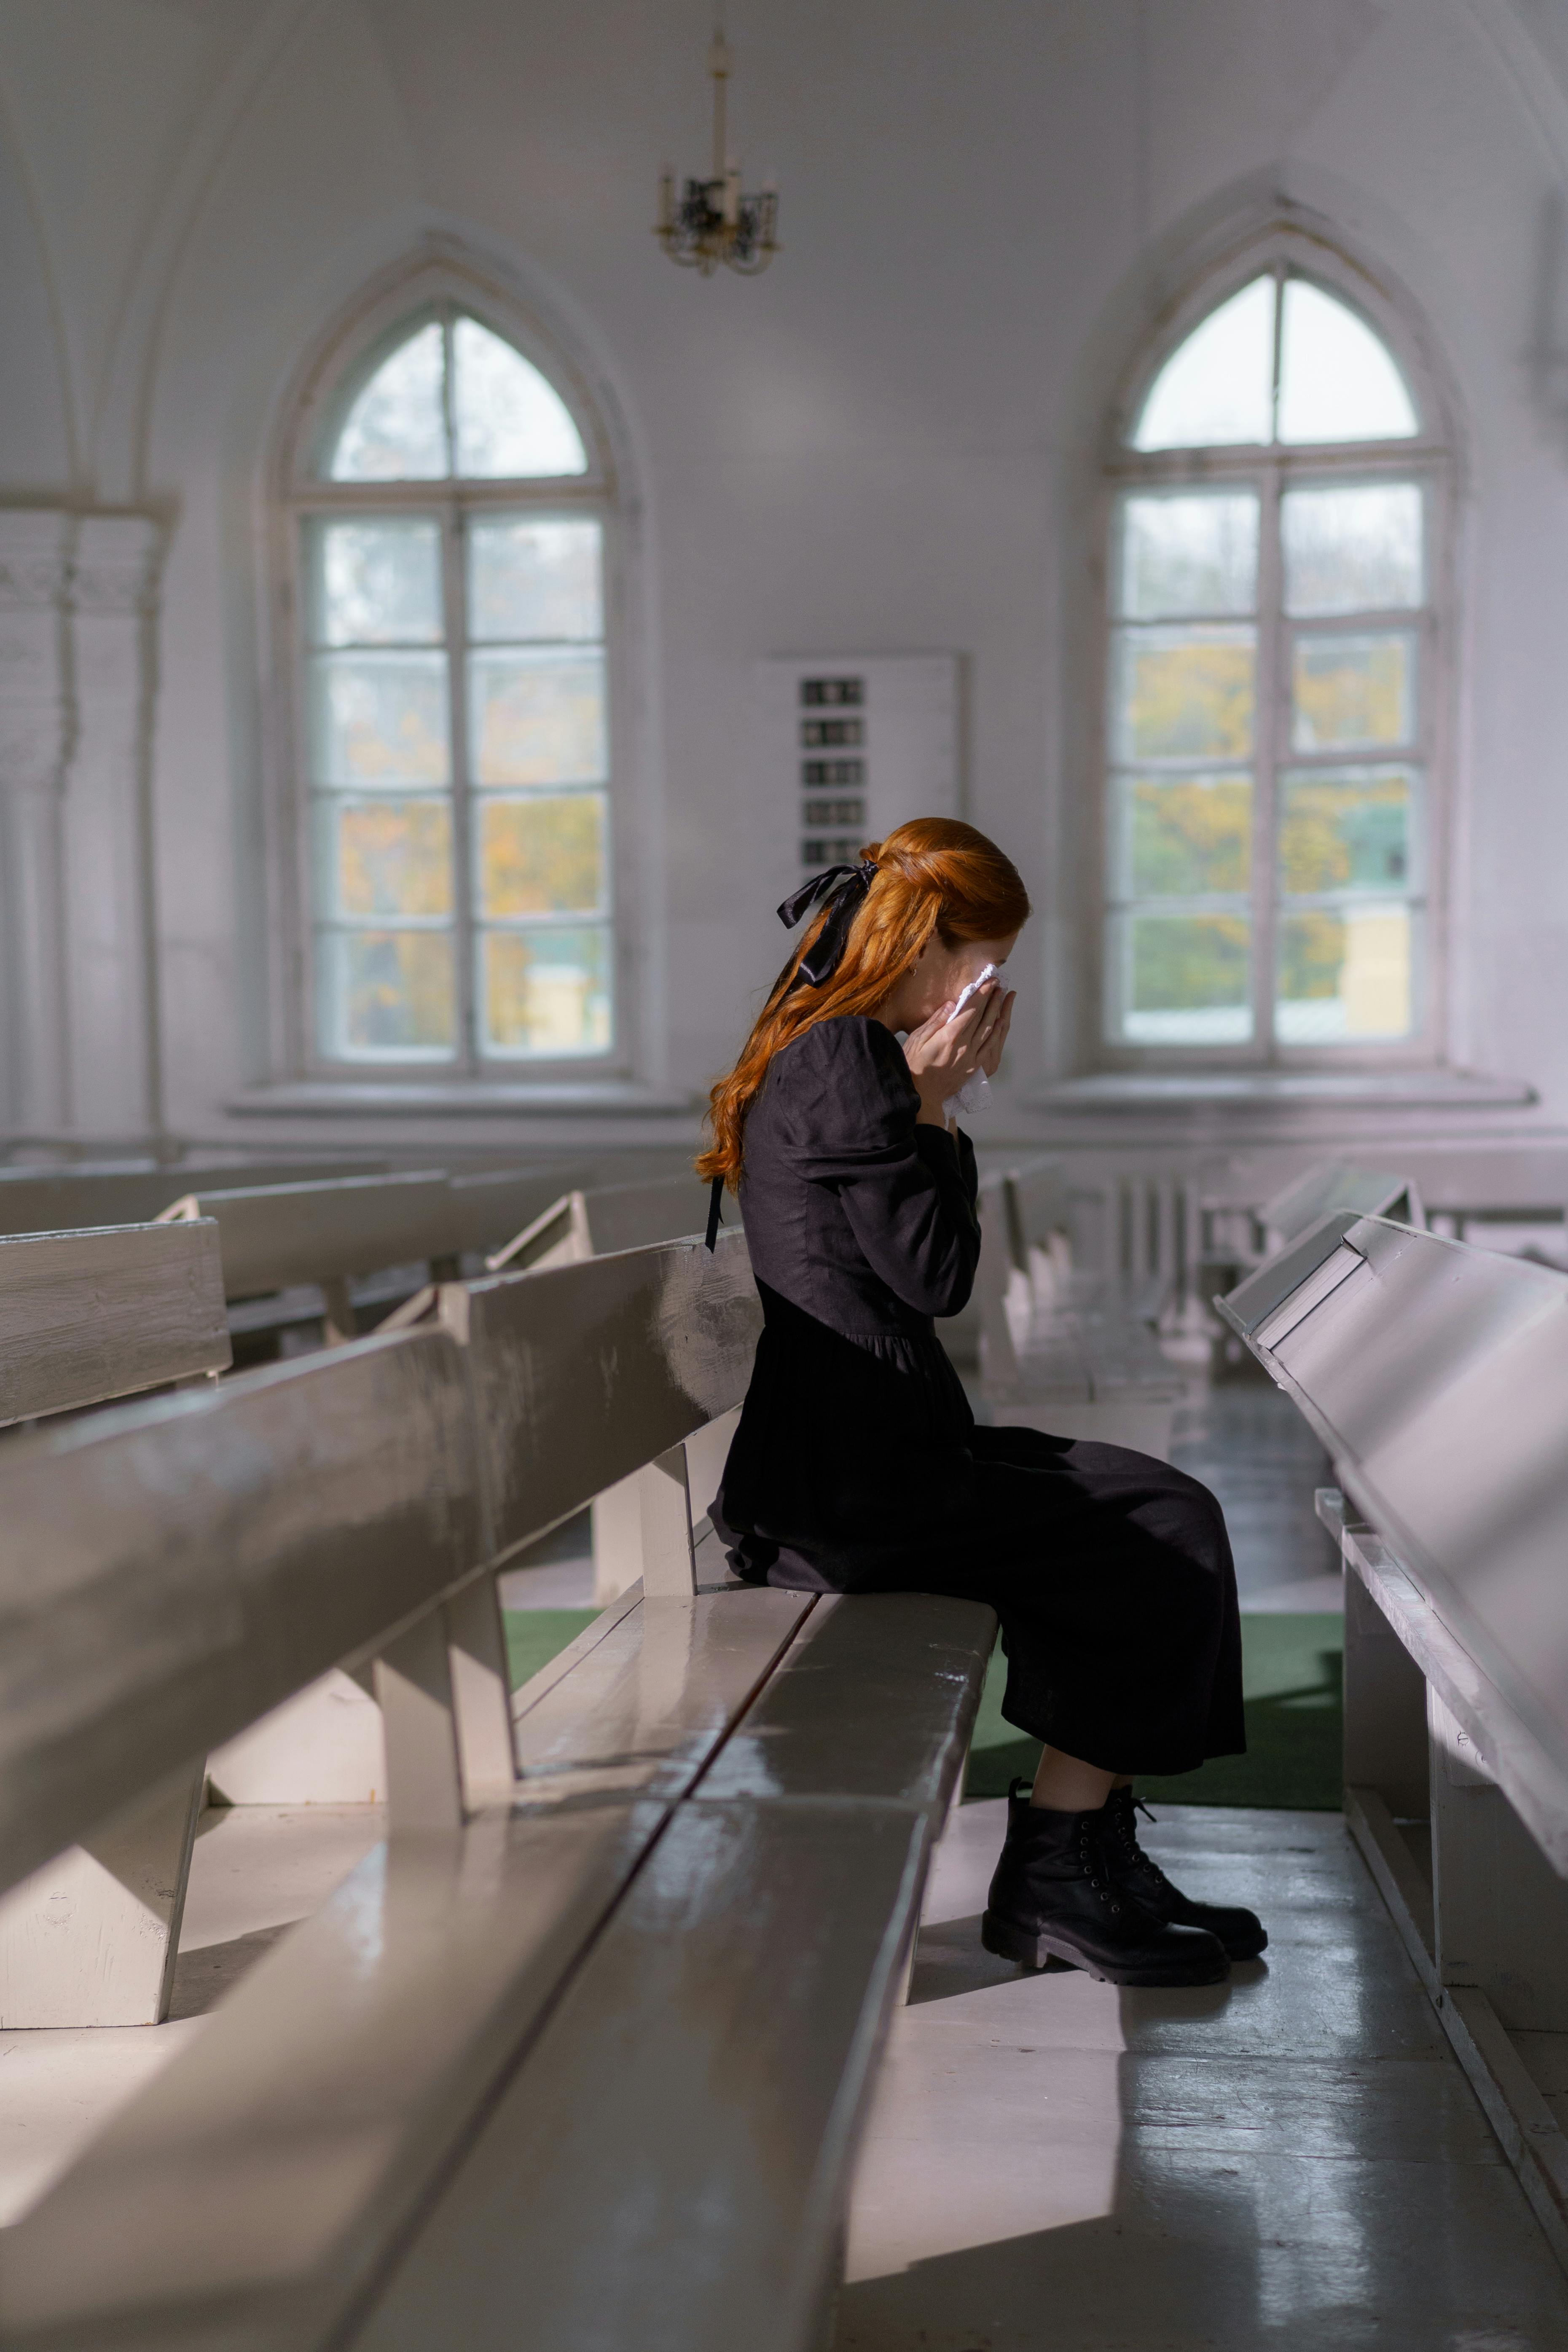 A woman crying in church | Source: Pexels